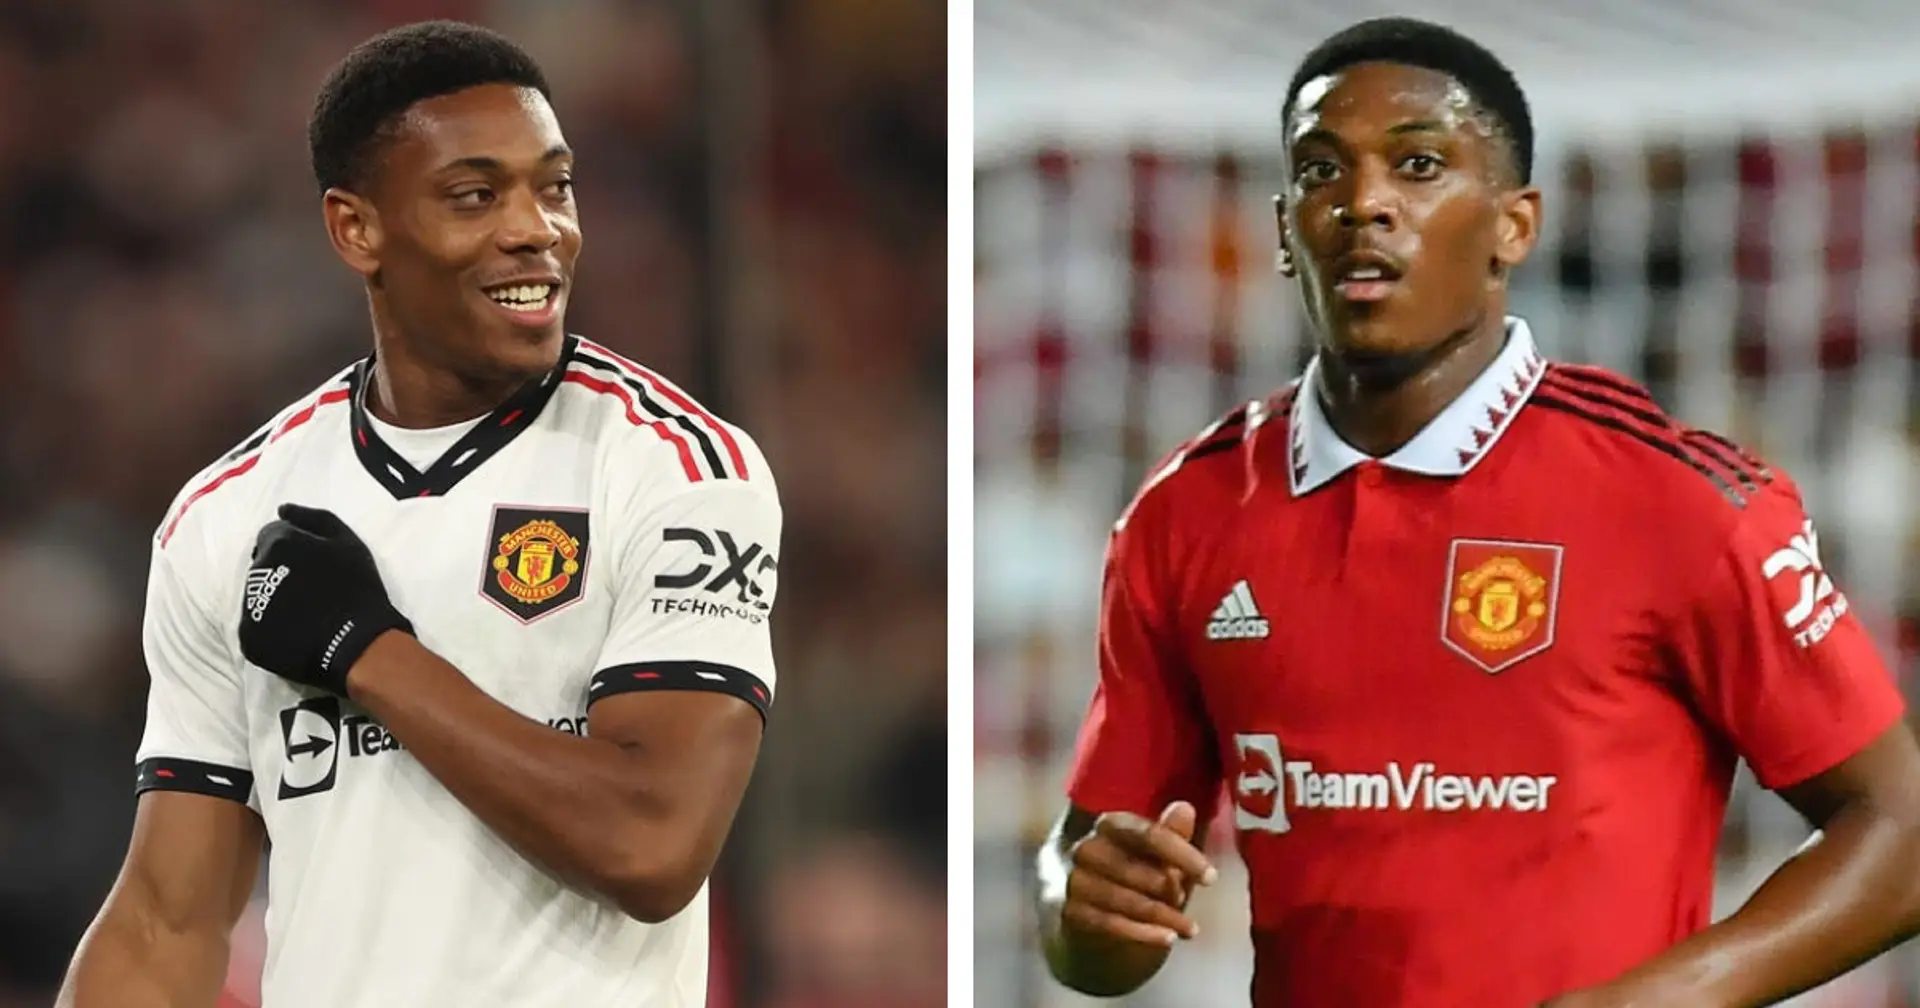 'He will finally activate that Ballon d'Or clause': Man United fans react to Anthony Martial's resurgence 